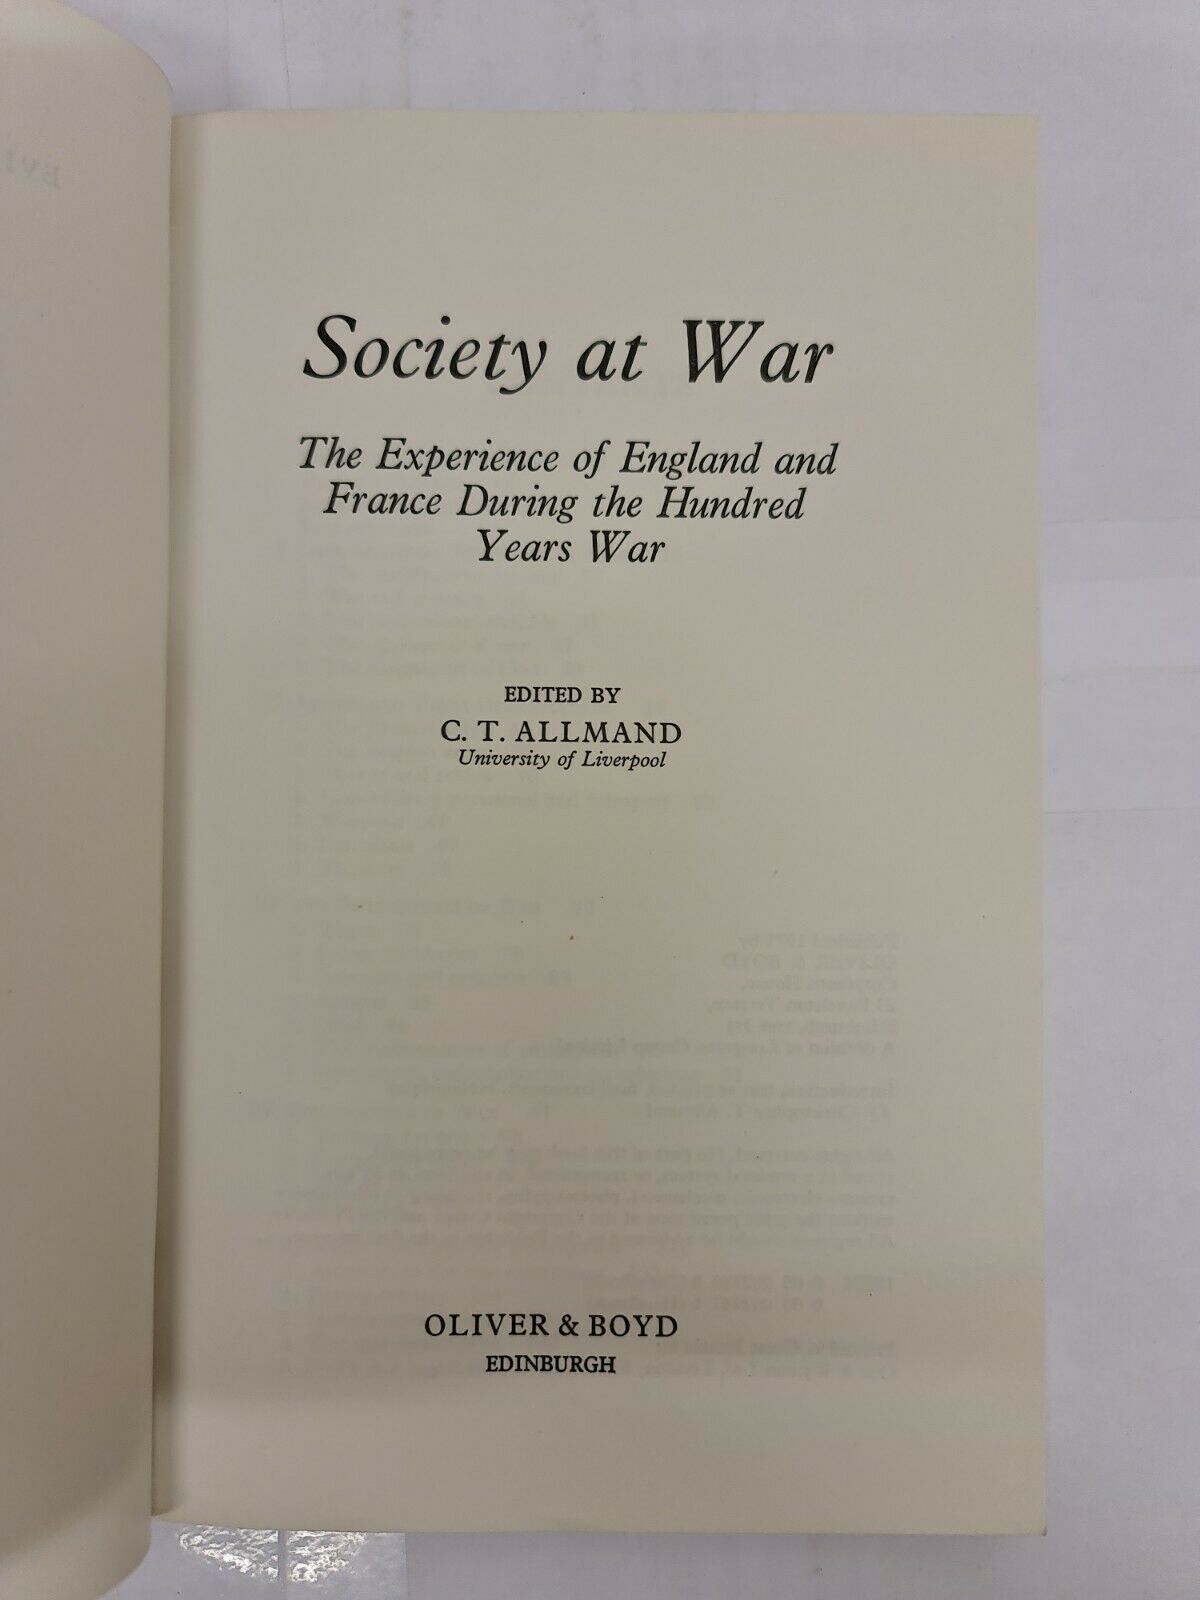 Society at War The Experience of England and France During the Hundred Years War